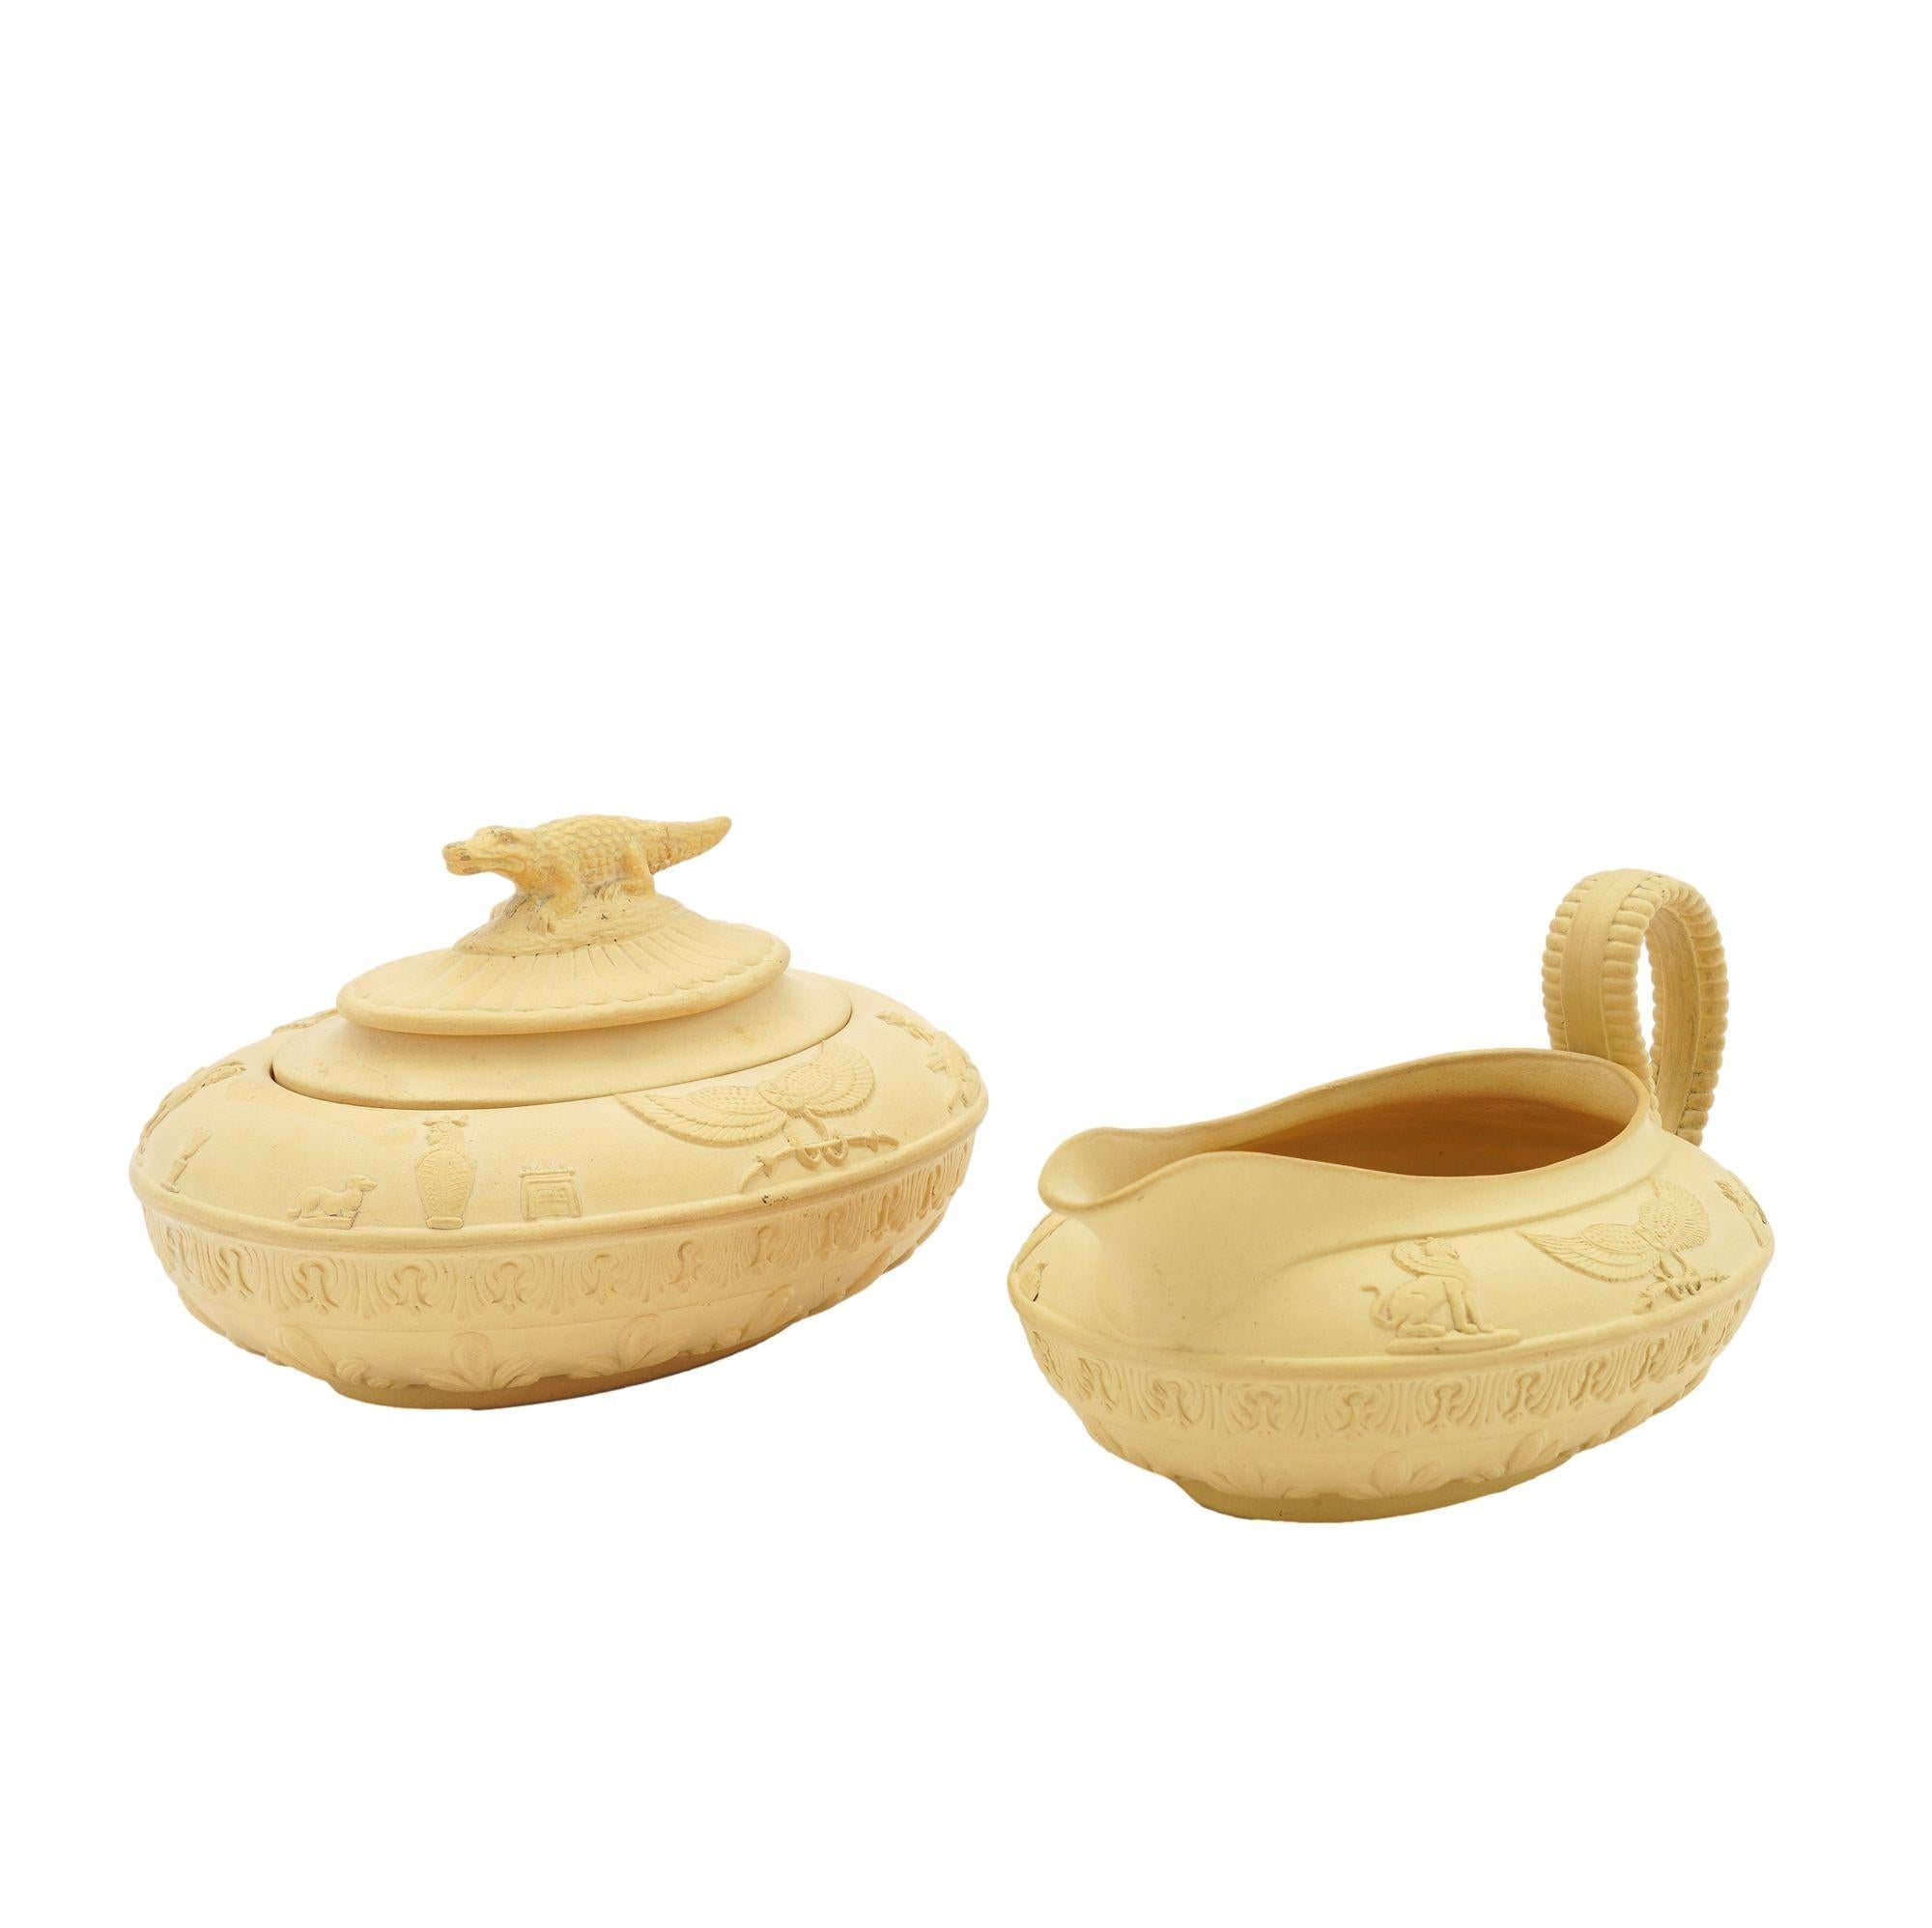 Bisque caneware creamer and covered sugar bowl in the Egyptian taste, highlighted by applied pseudo hieroglyphics and a crocodile finial on the sugar bowl. Produced in the Tetschen studio of Schiller & Gerbing, located in what is now the Czech